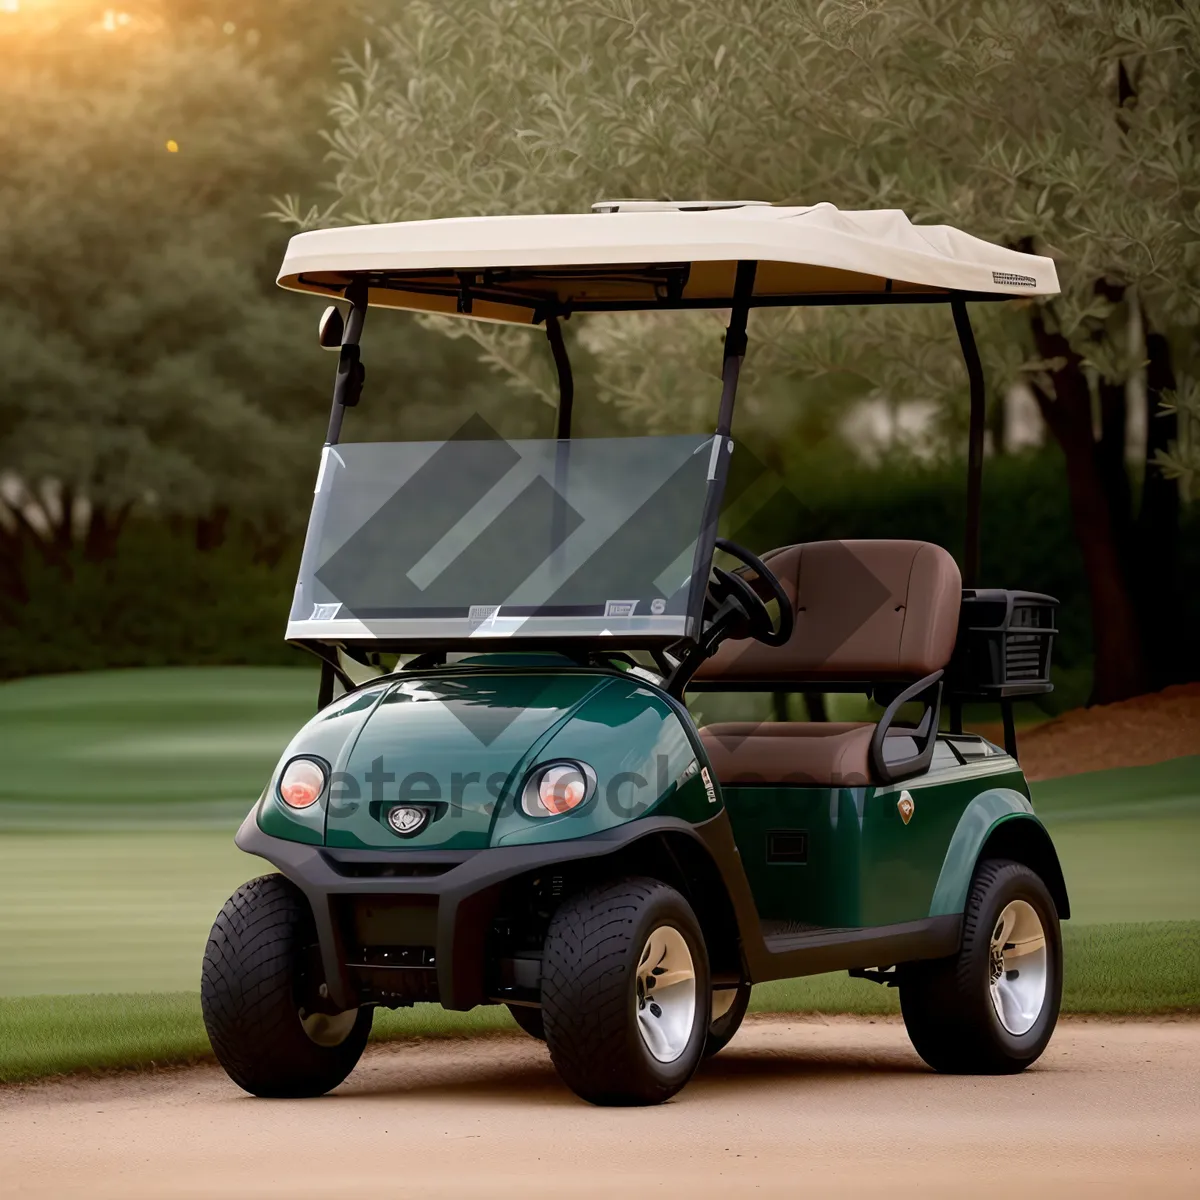 Picture of Golfer Driving Golf Cart on Grass